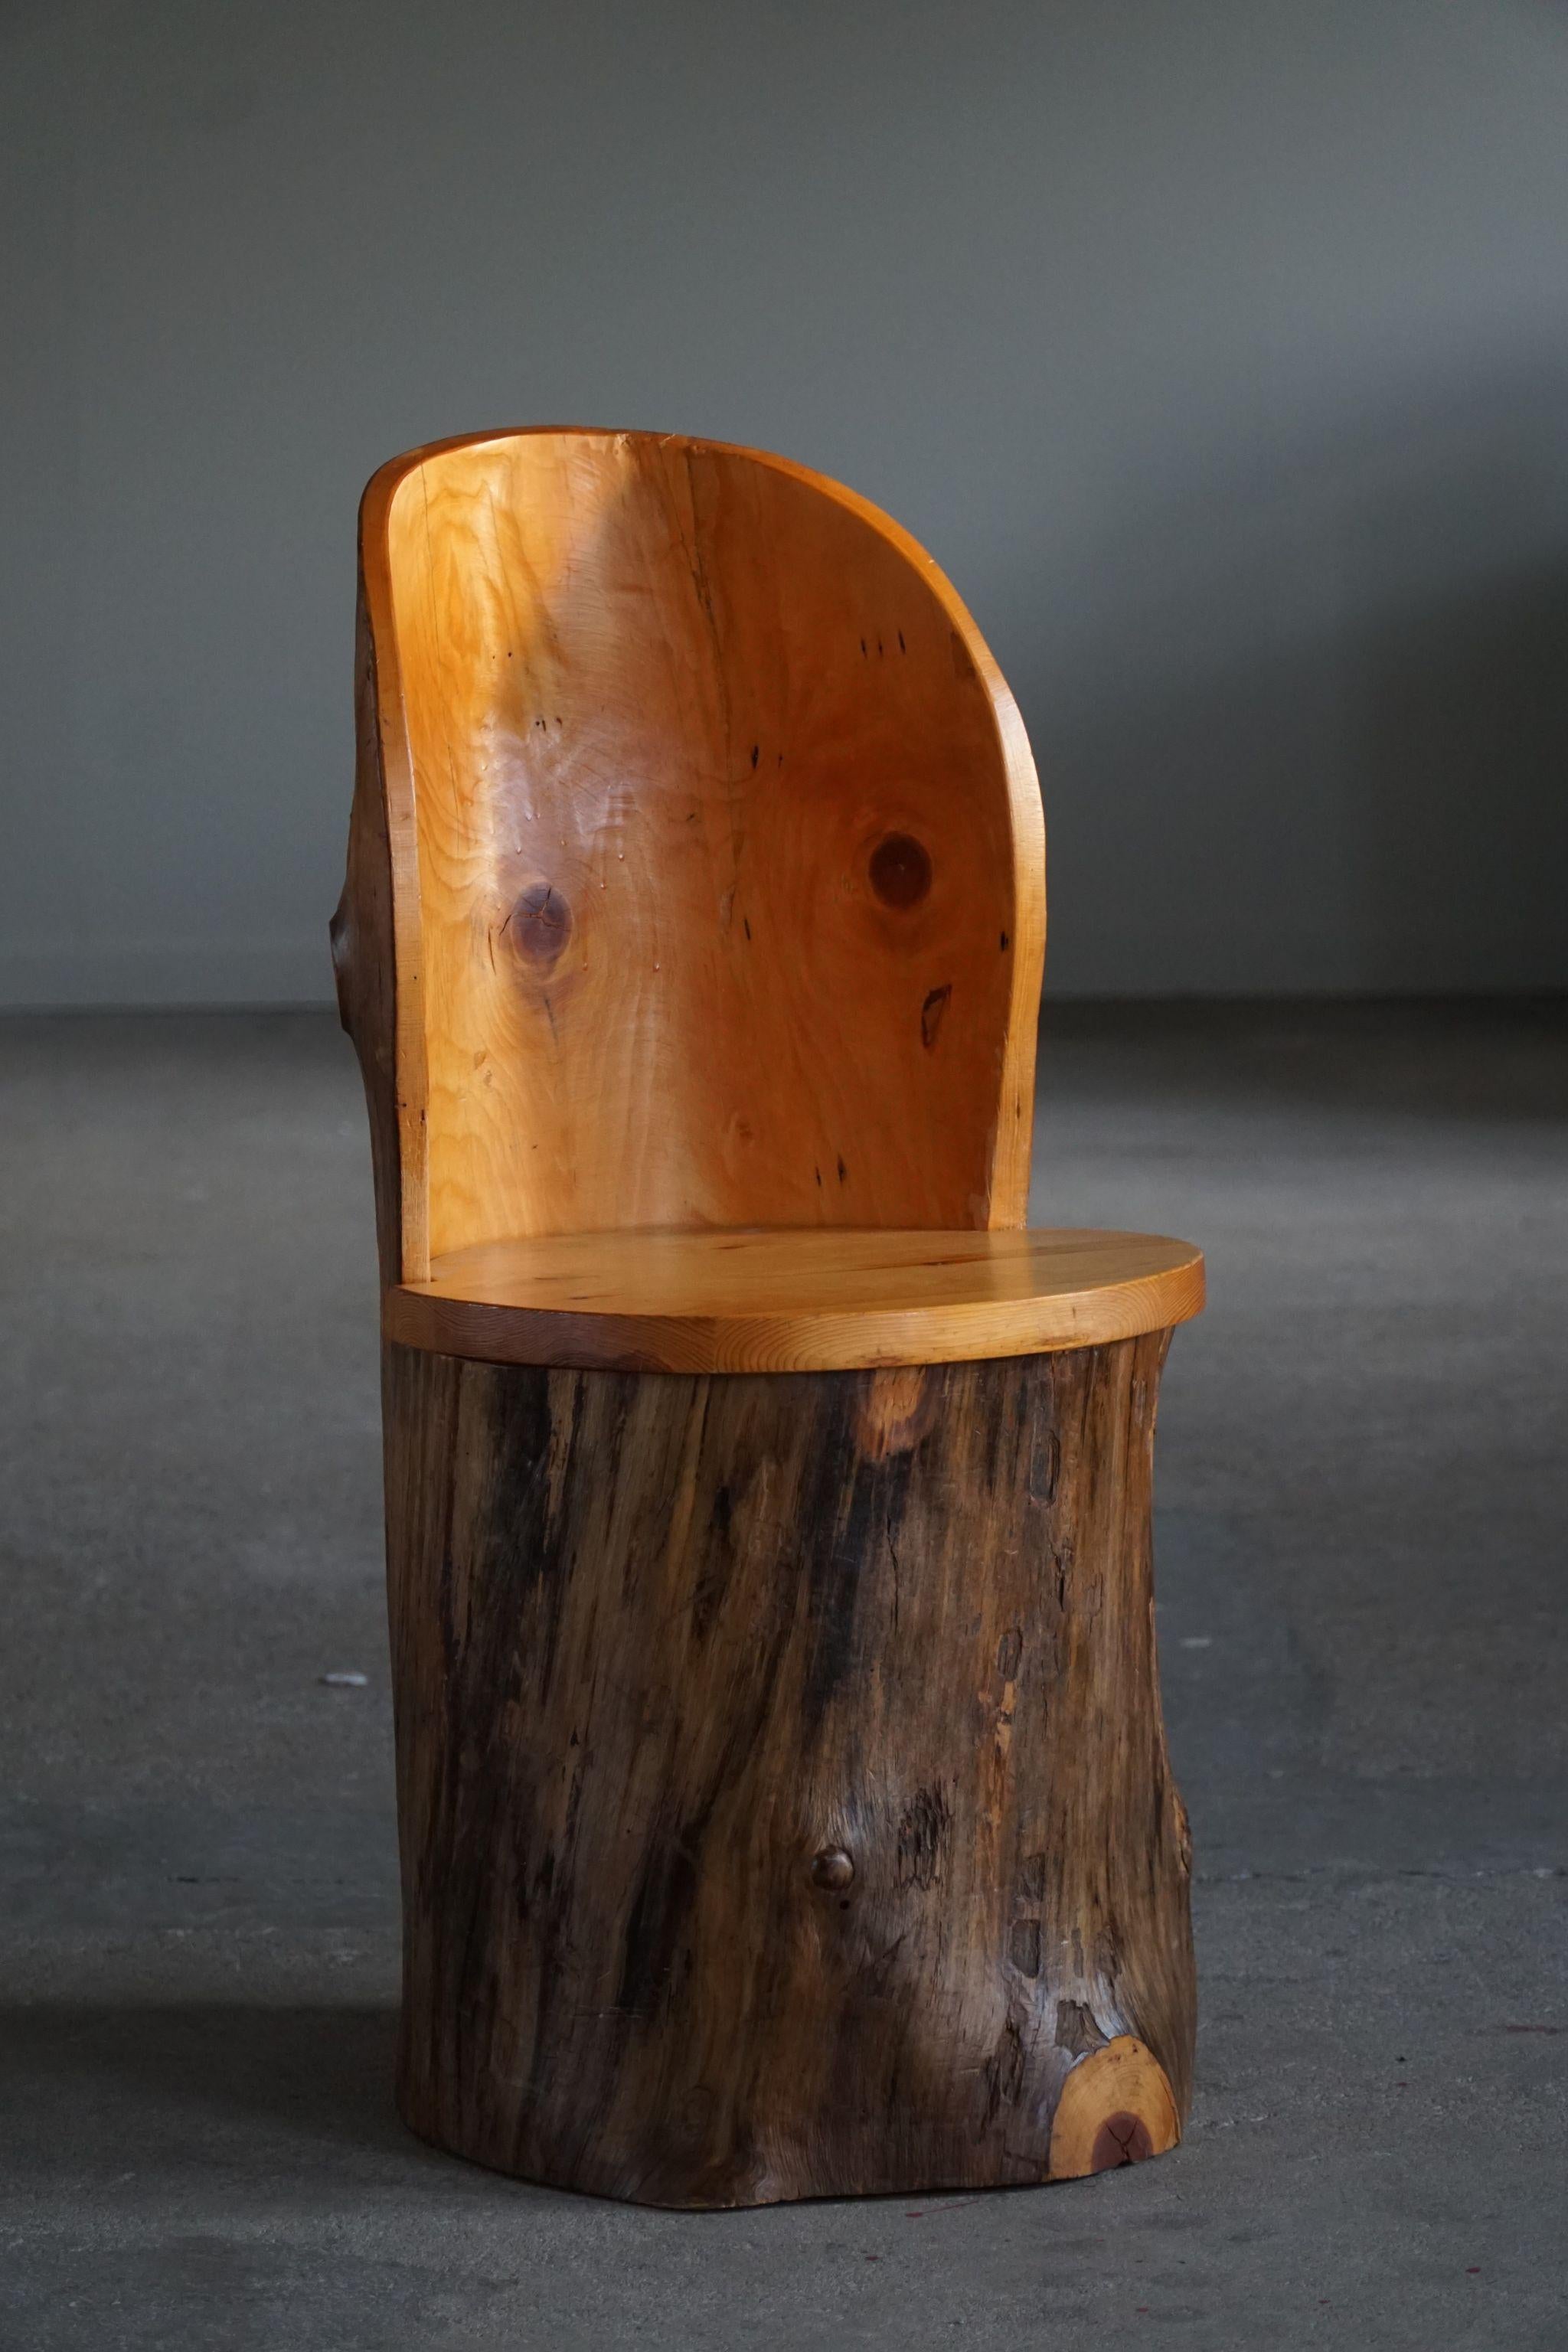 Hand-Carved Hand Carved Primitive Swedish Modern Stump Chair in Pine, Wabi Sabi, 1960s For Sale